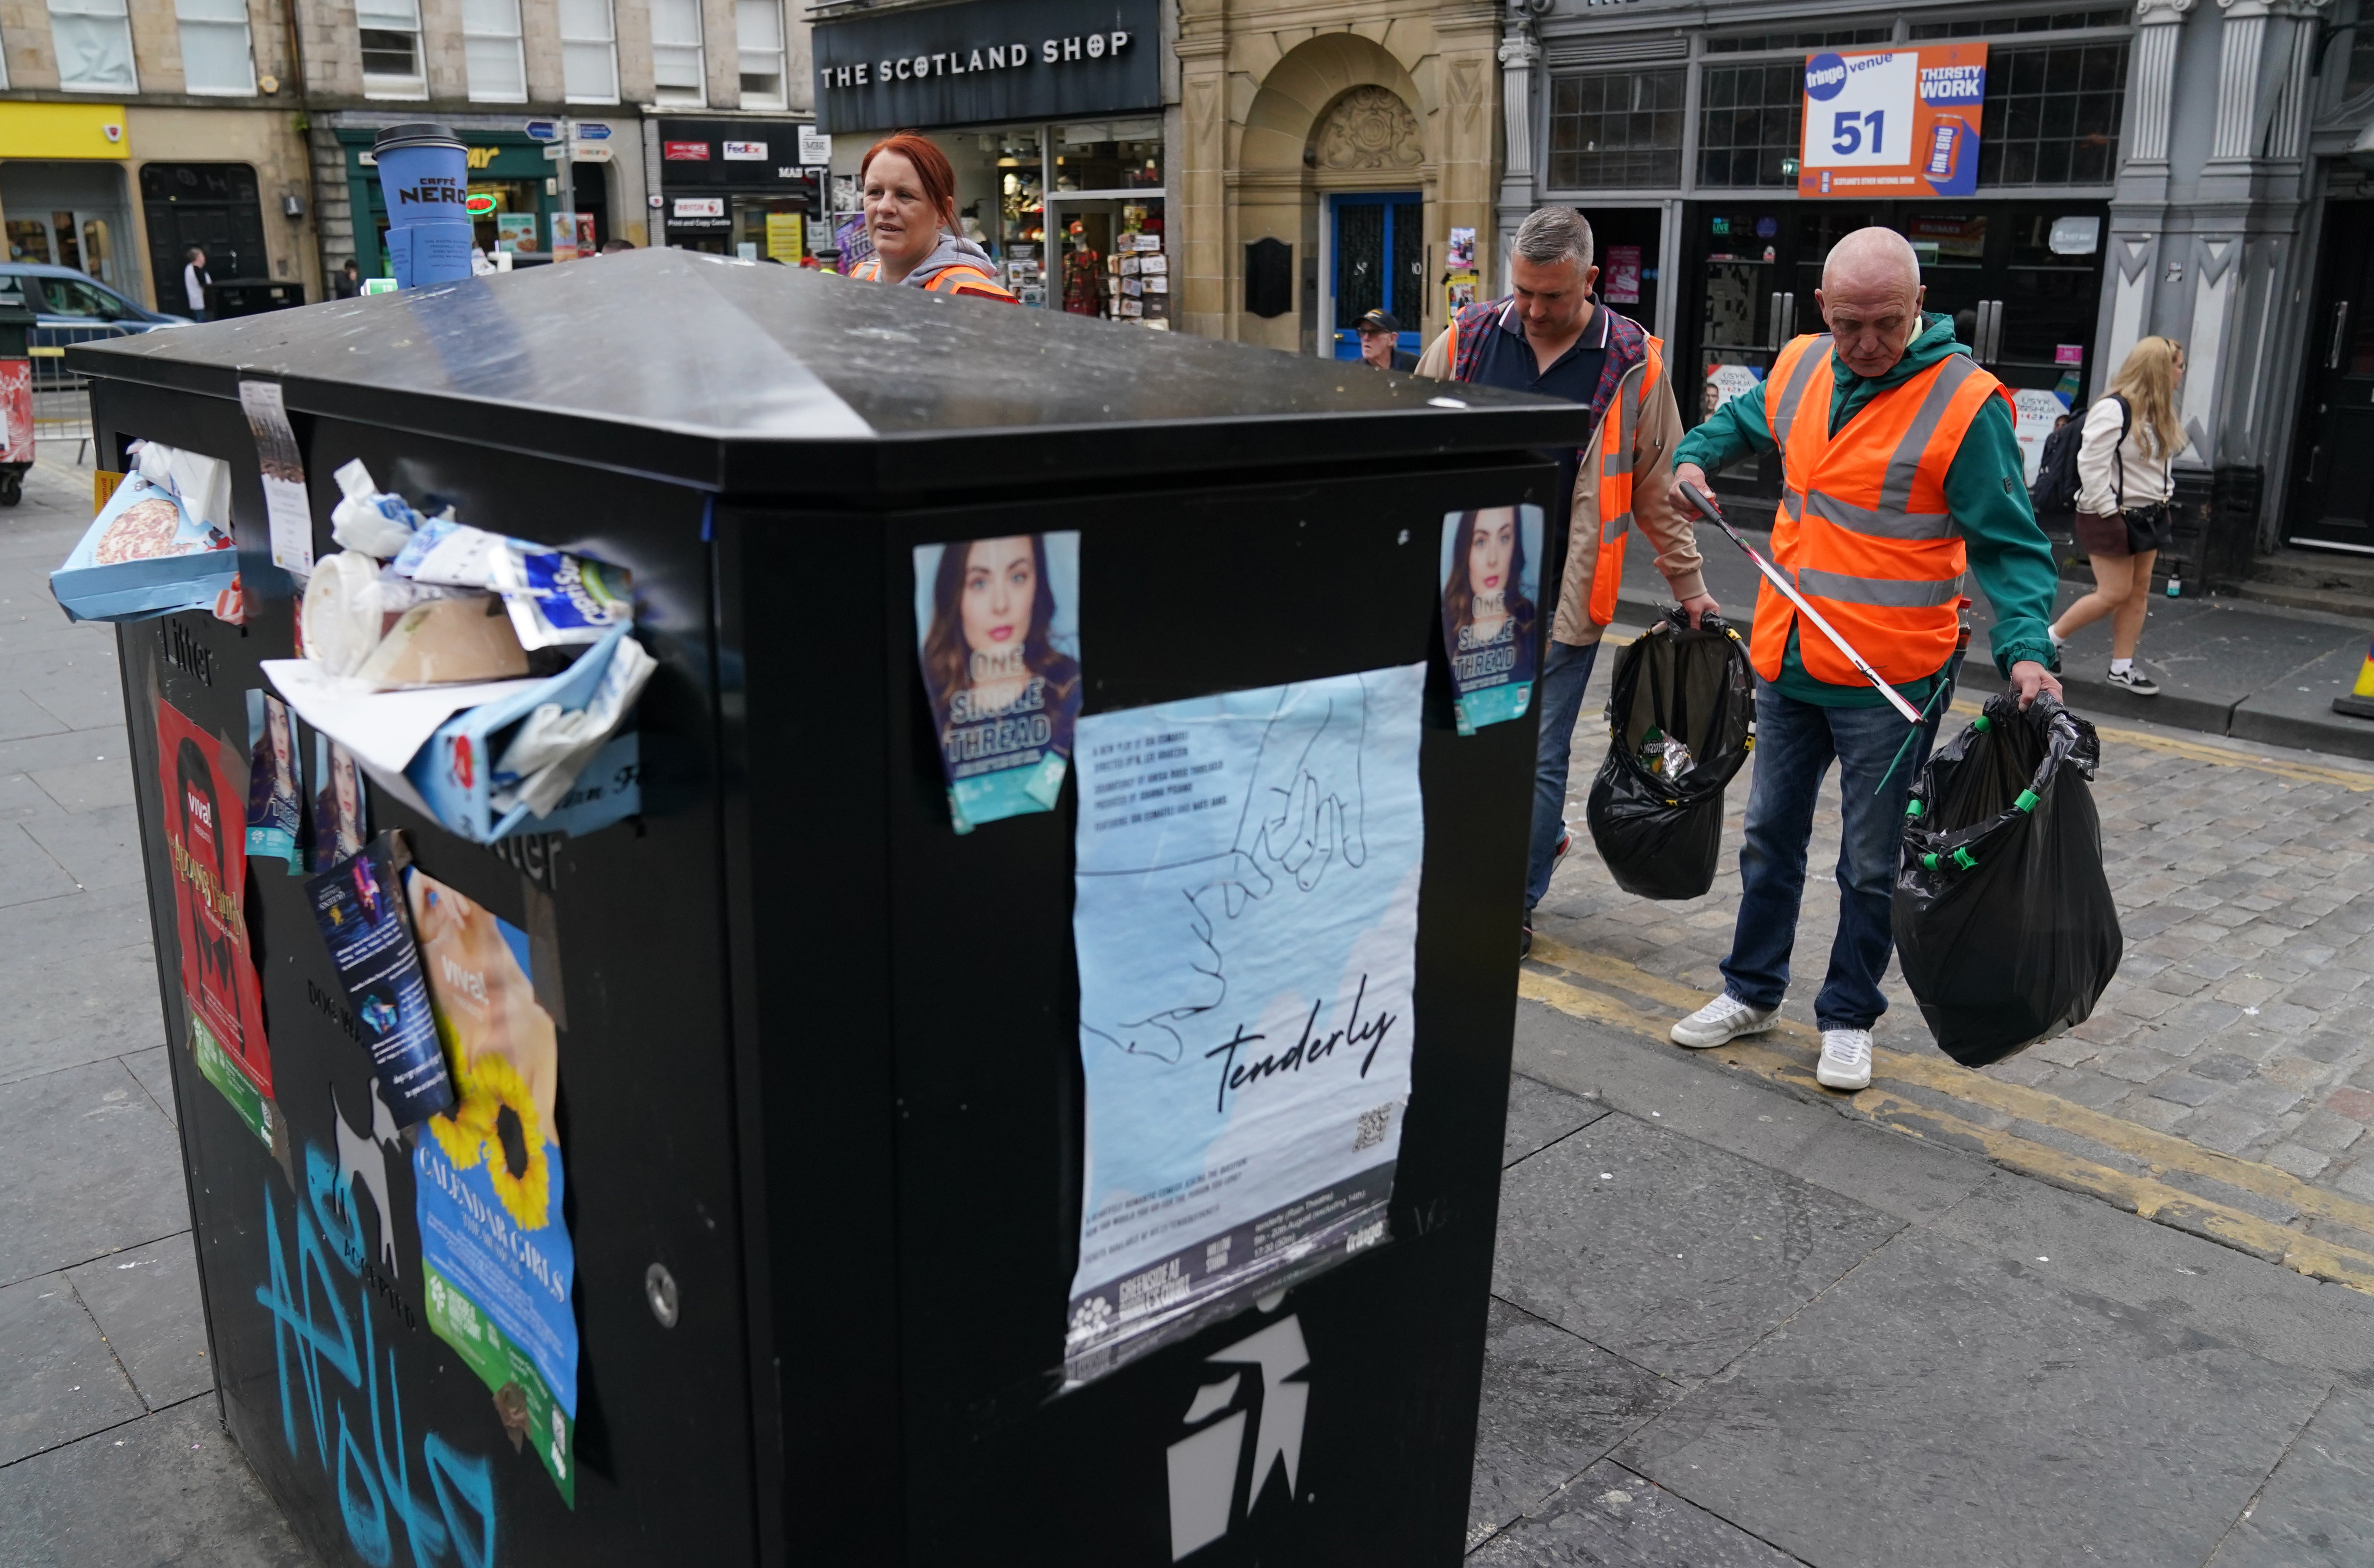 Rubbish bins in Edinburgh have not been emptied as the result of a strike by cleaning workers (Andrew Milligan/PA)